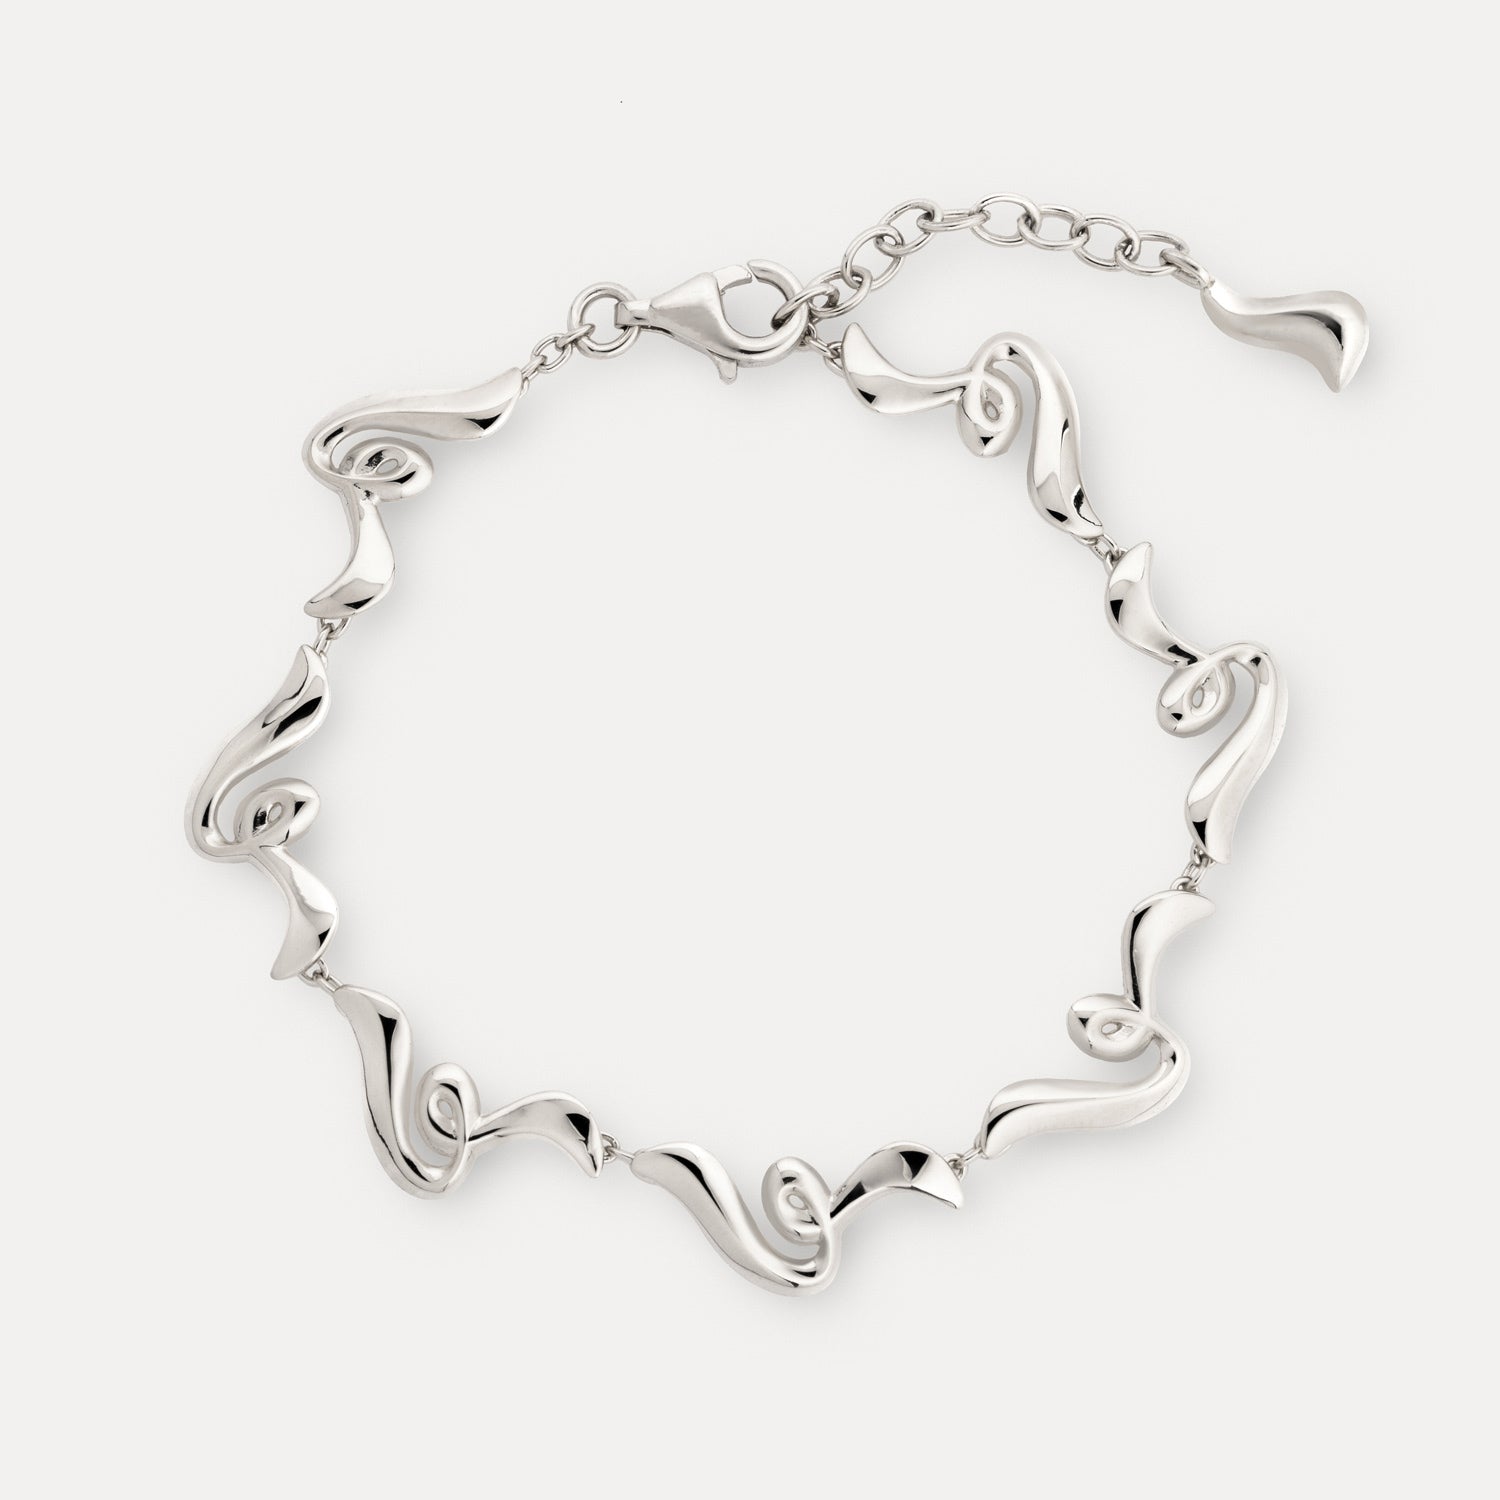 Poise Twirl Chain Bracelet, recycled Sterling Silver - VEYIA Berlin